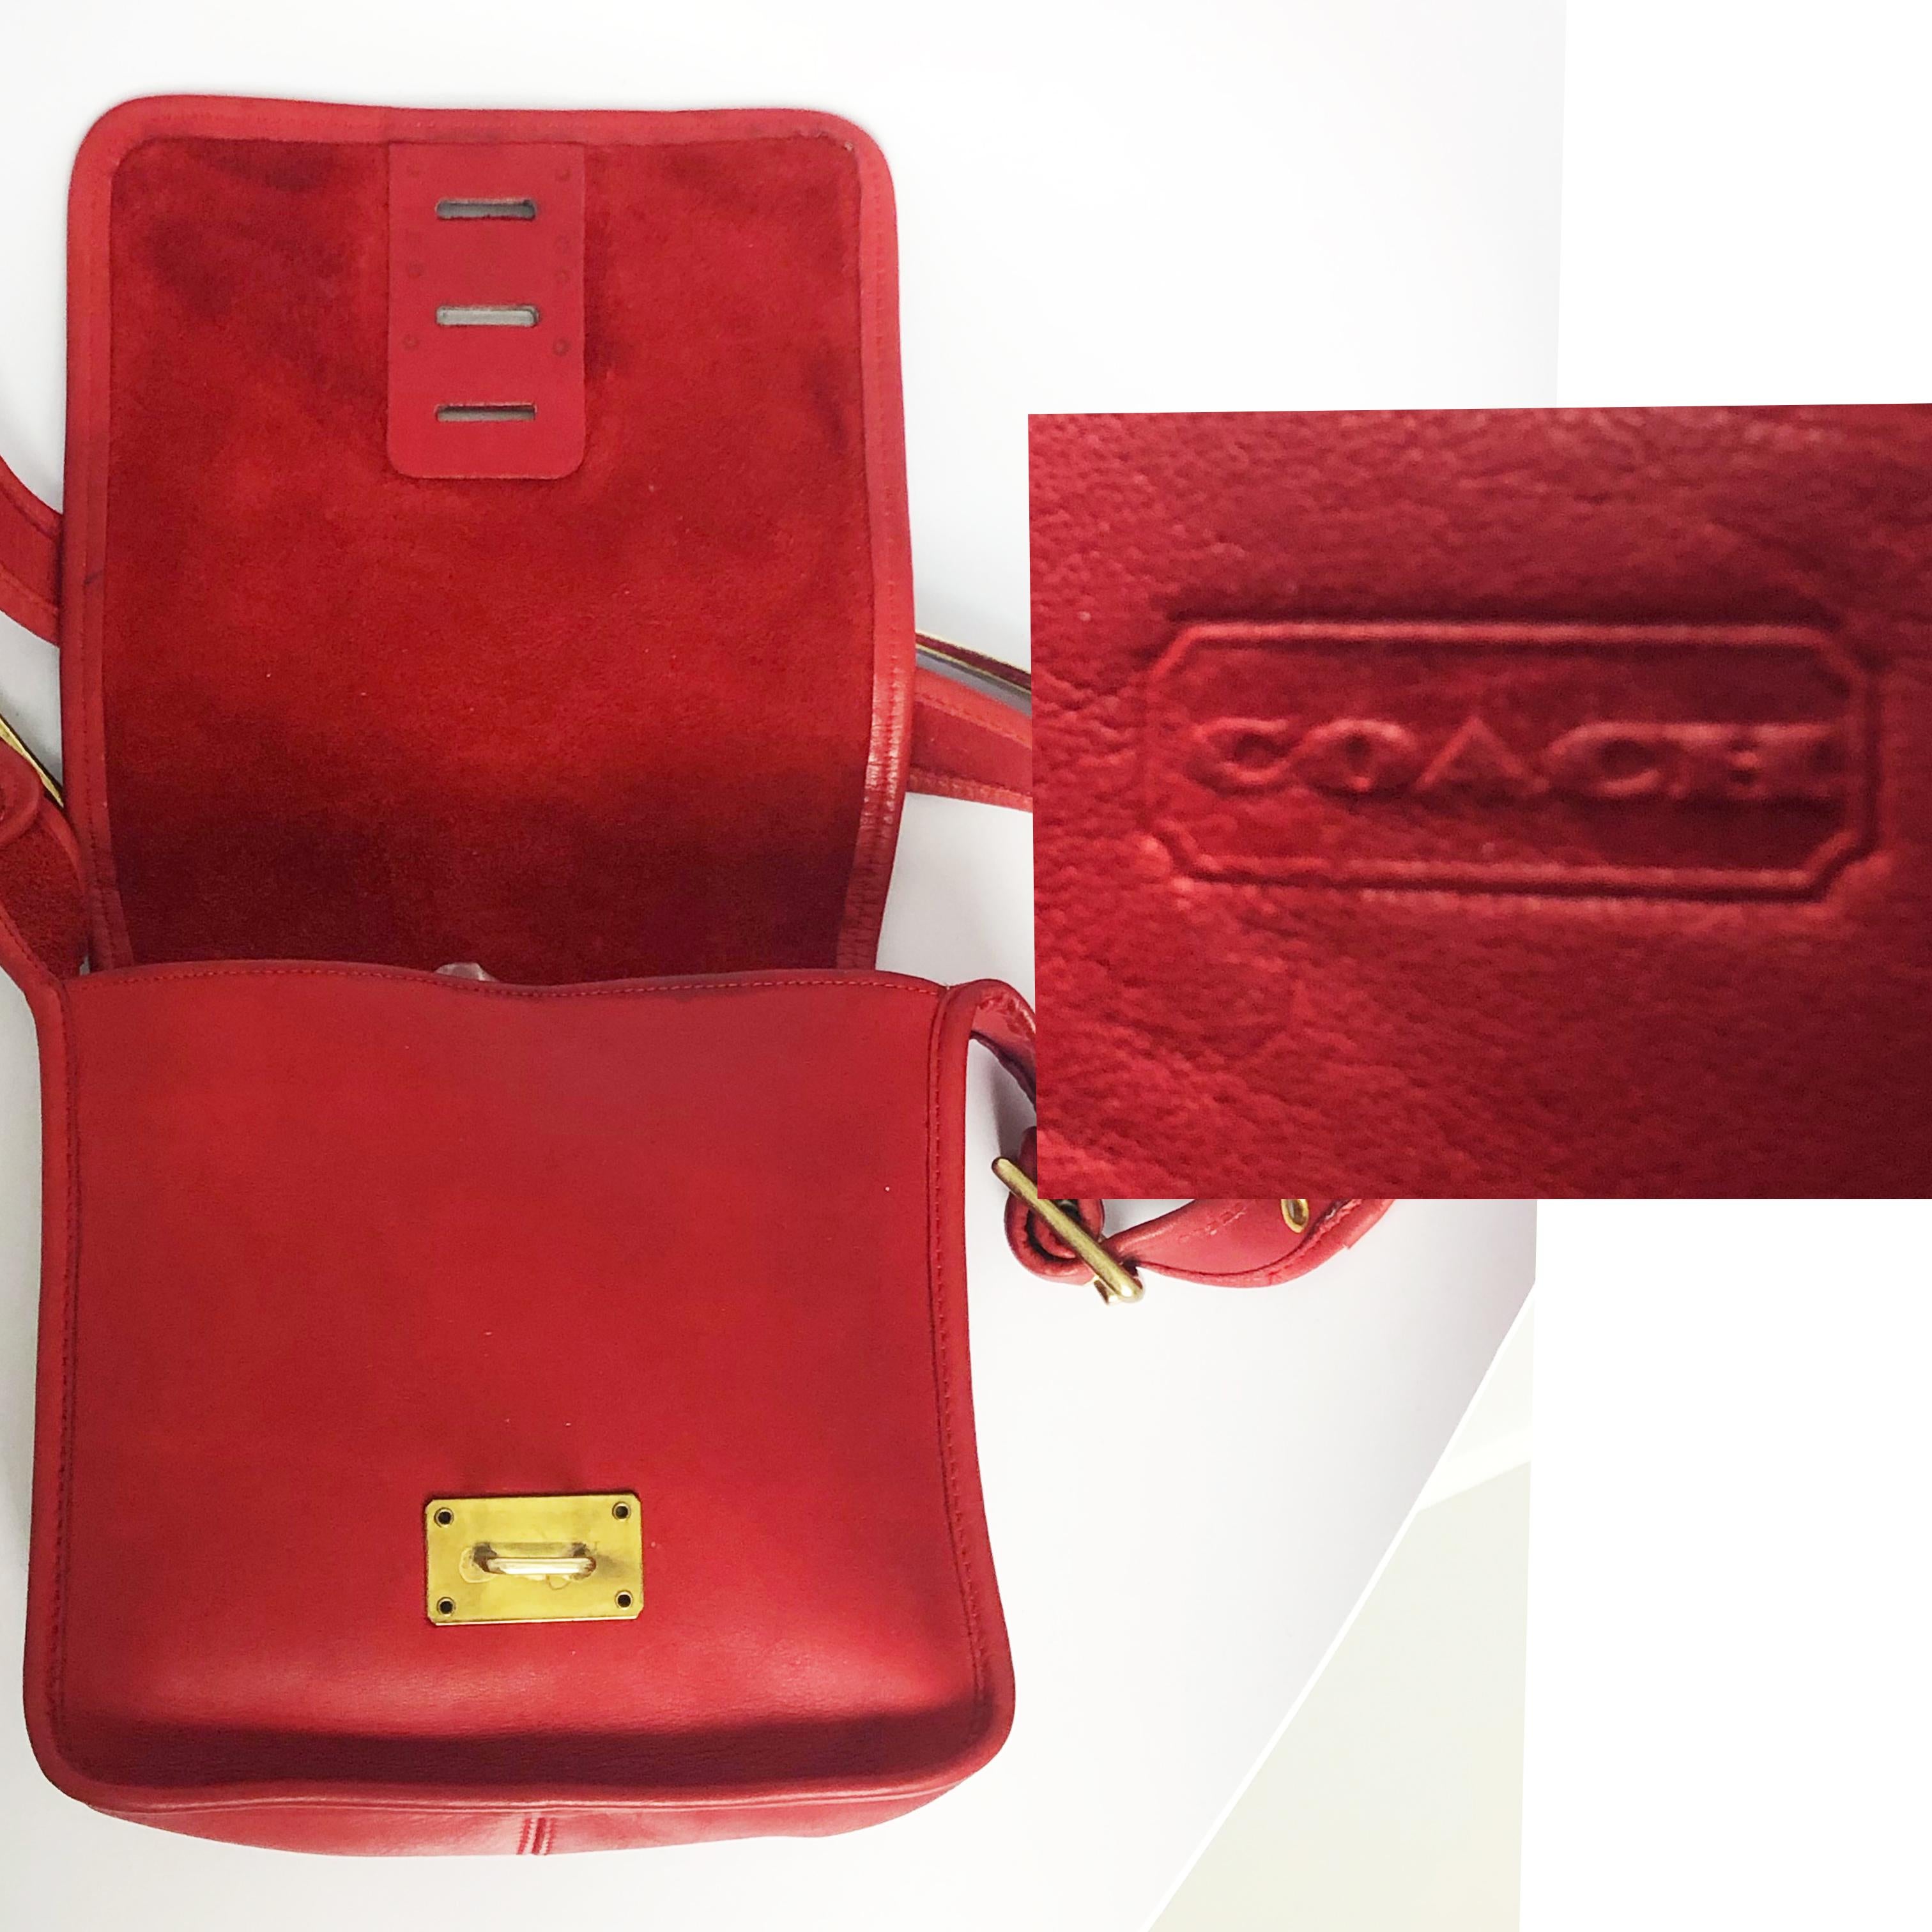 Women's or Men's Bonnie Cashin for Coach Shoulder Bag with Hasp Lock Red Leather Vintage 70s Rare